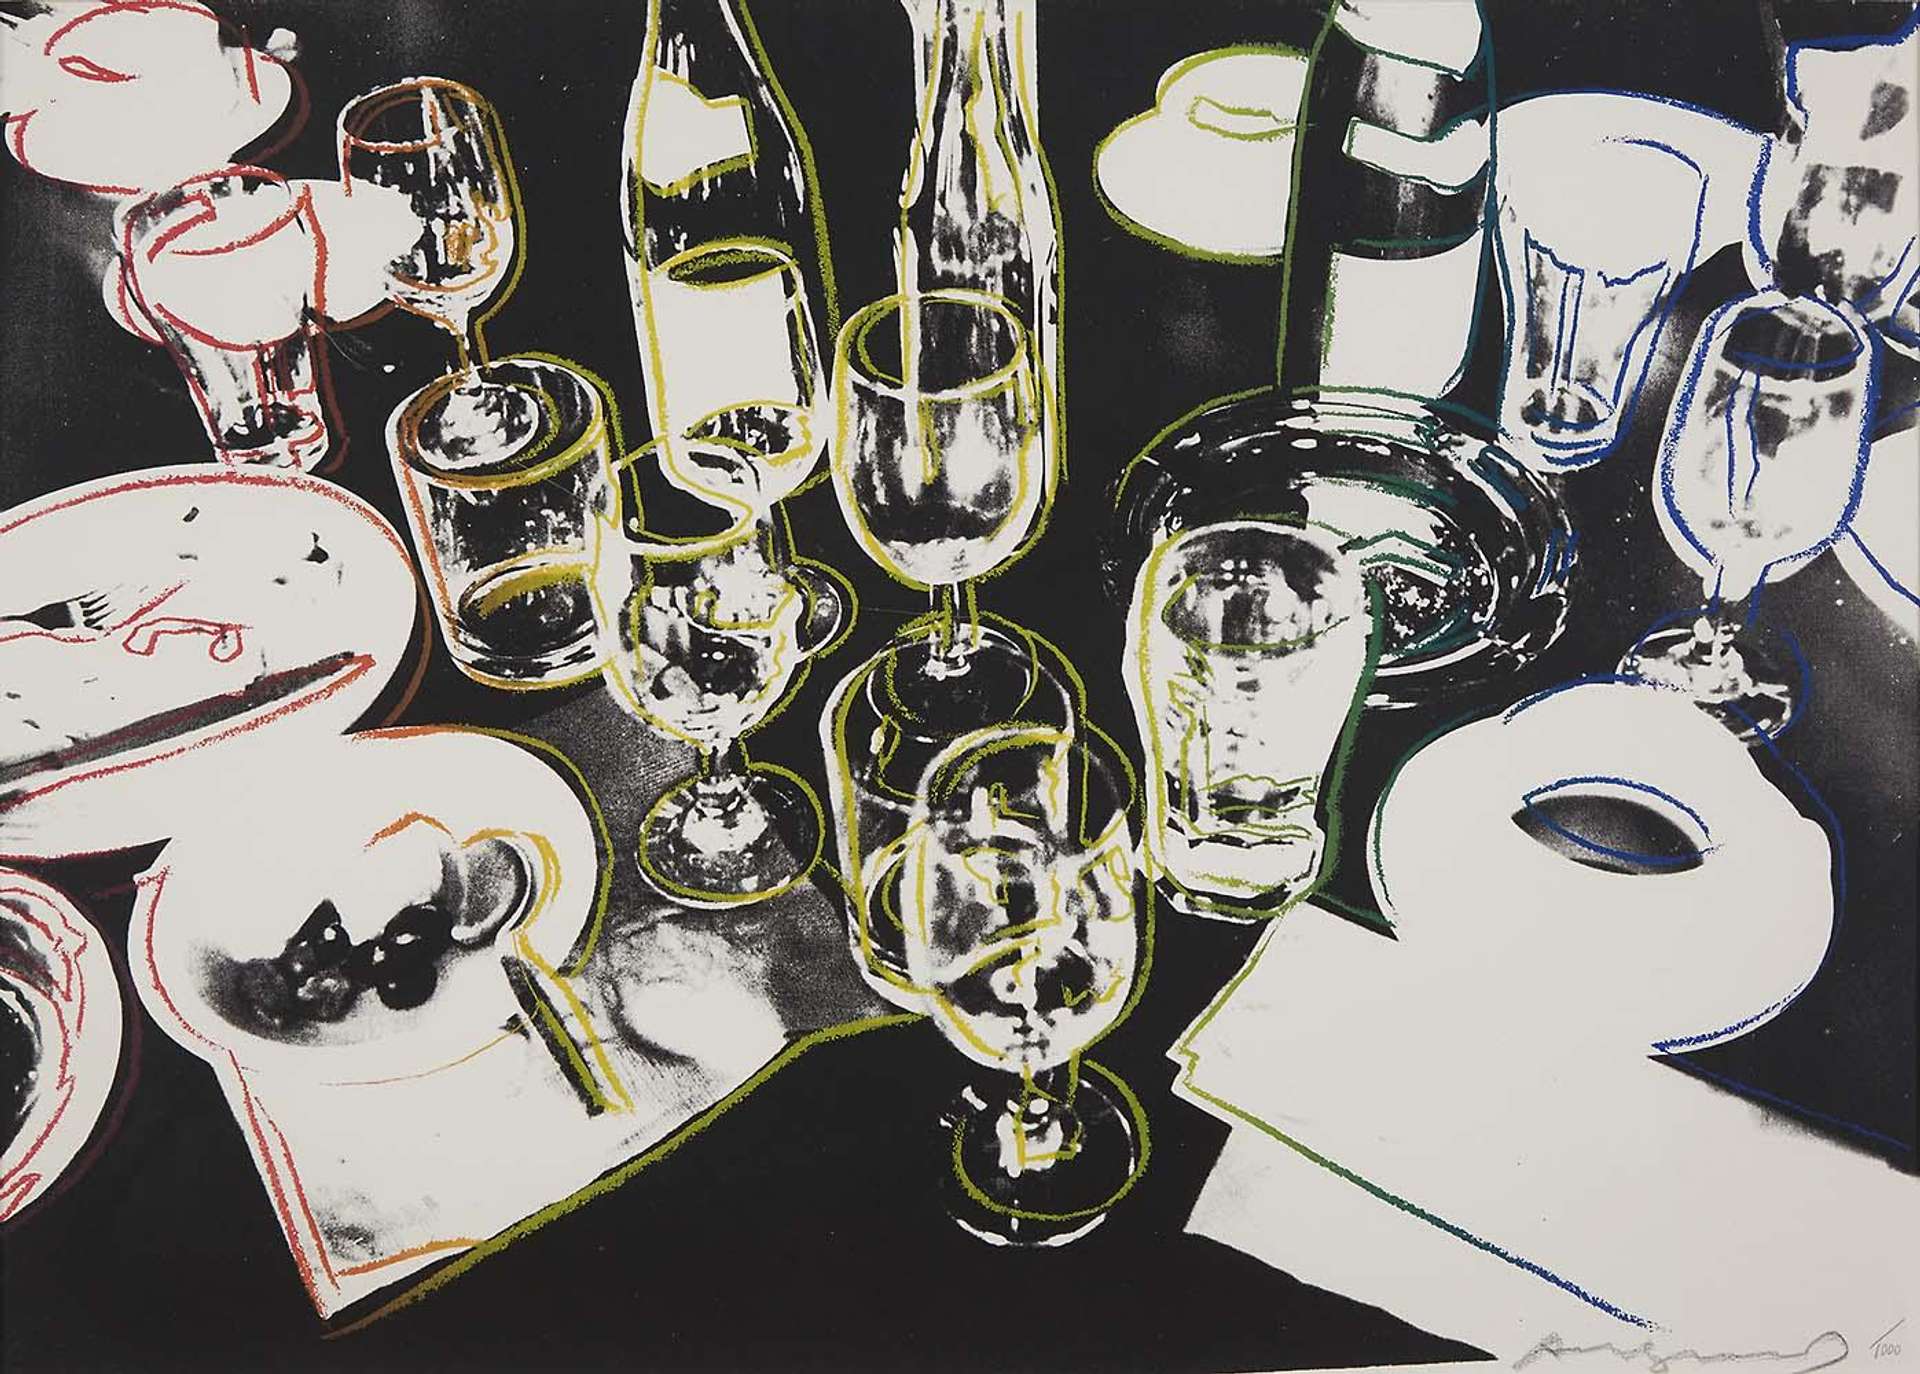 After The Party (F. & S. II.183) by Andy Warhol